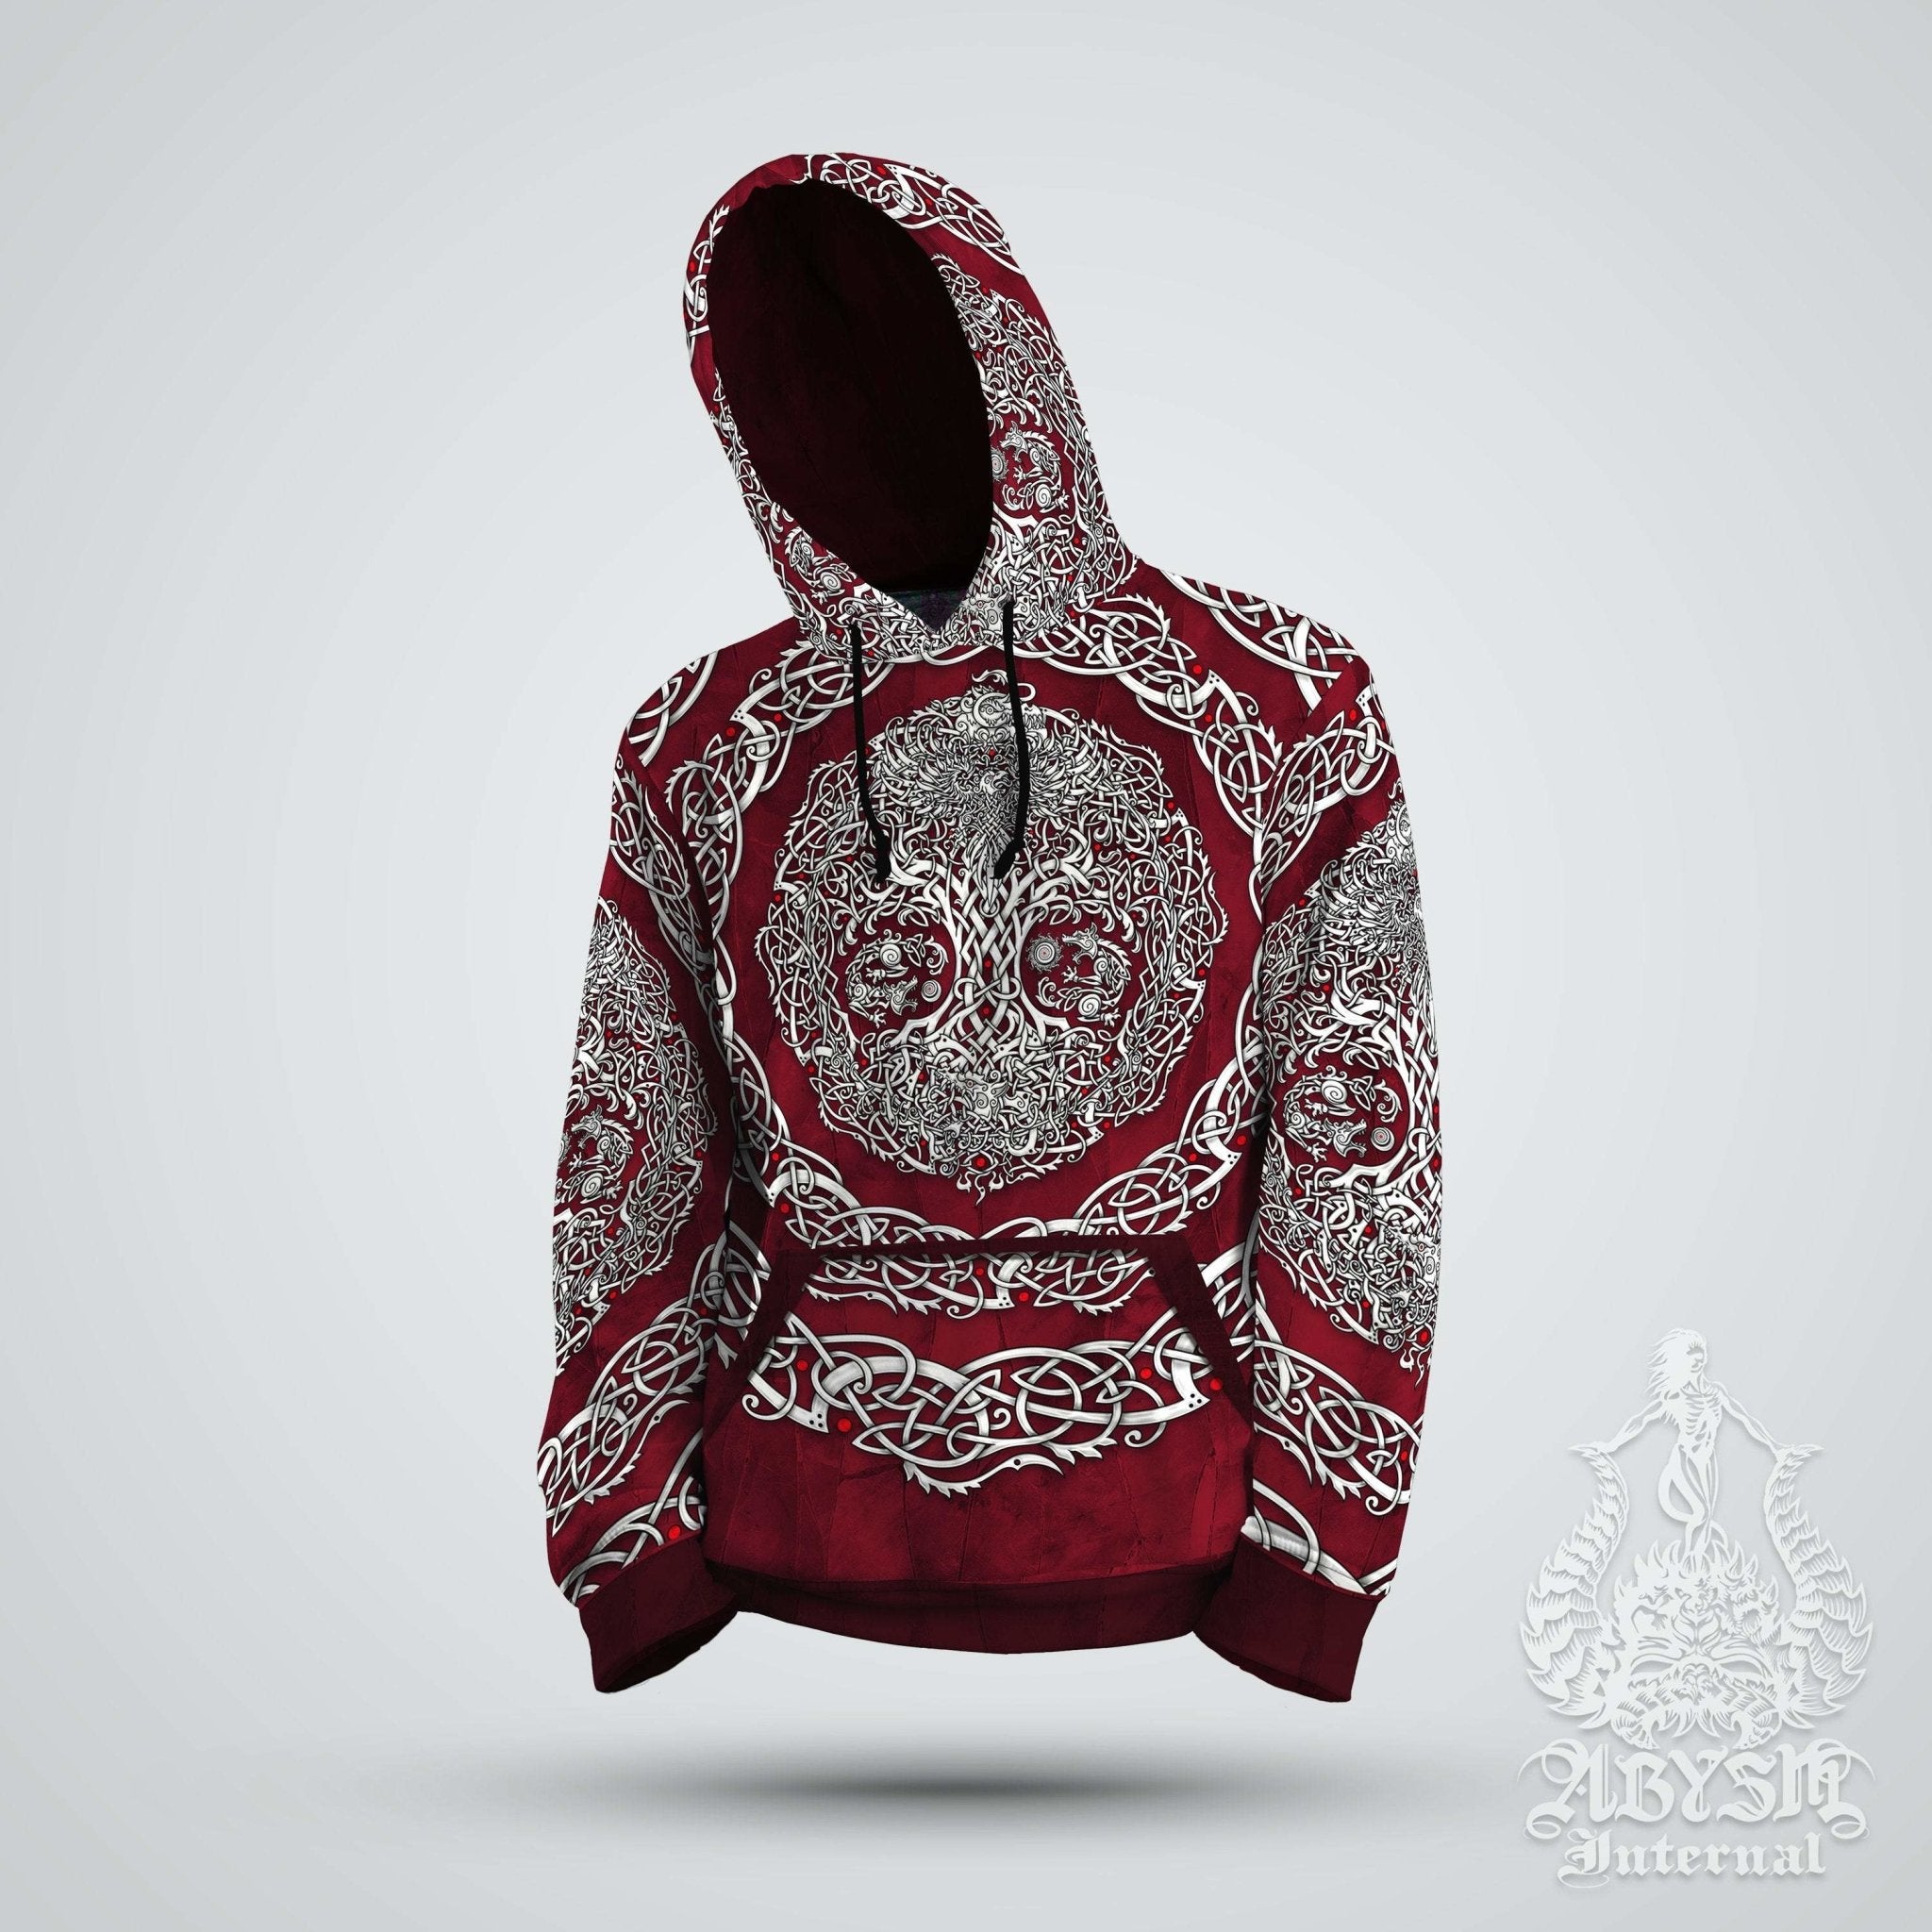 Yggdrasil Hoodie, Viking Sweater, Norse Street Outfit, Tree of Life Streetwear, Alternative Clothing, Unisex - White Red - Abysm Internal